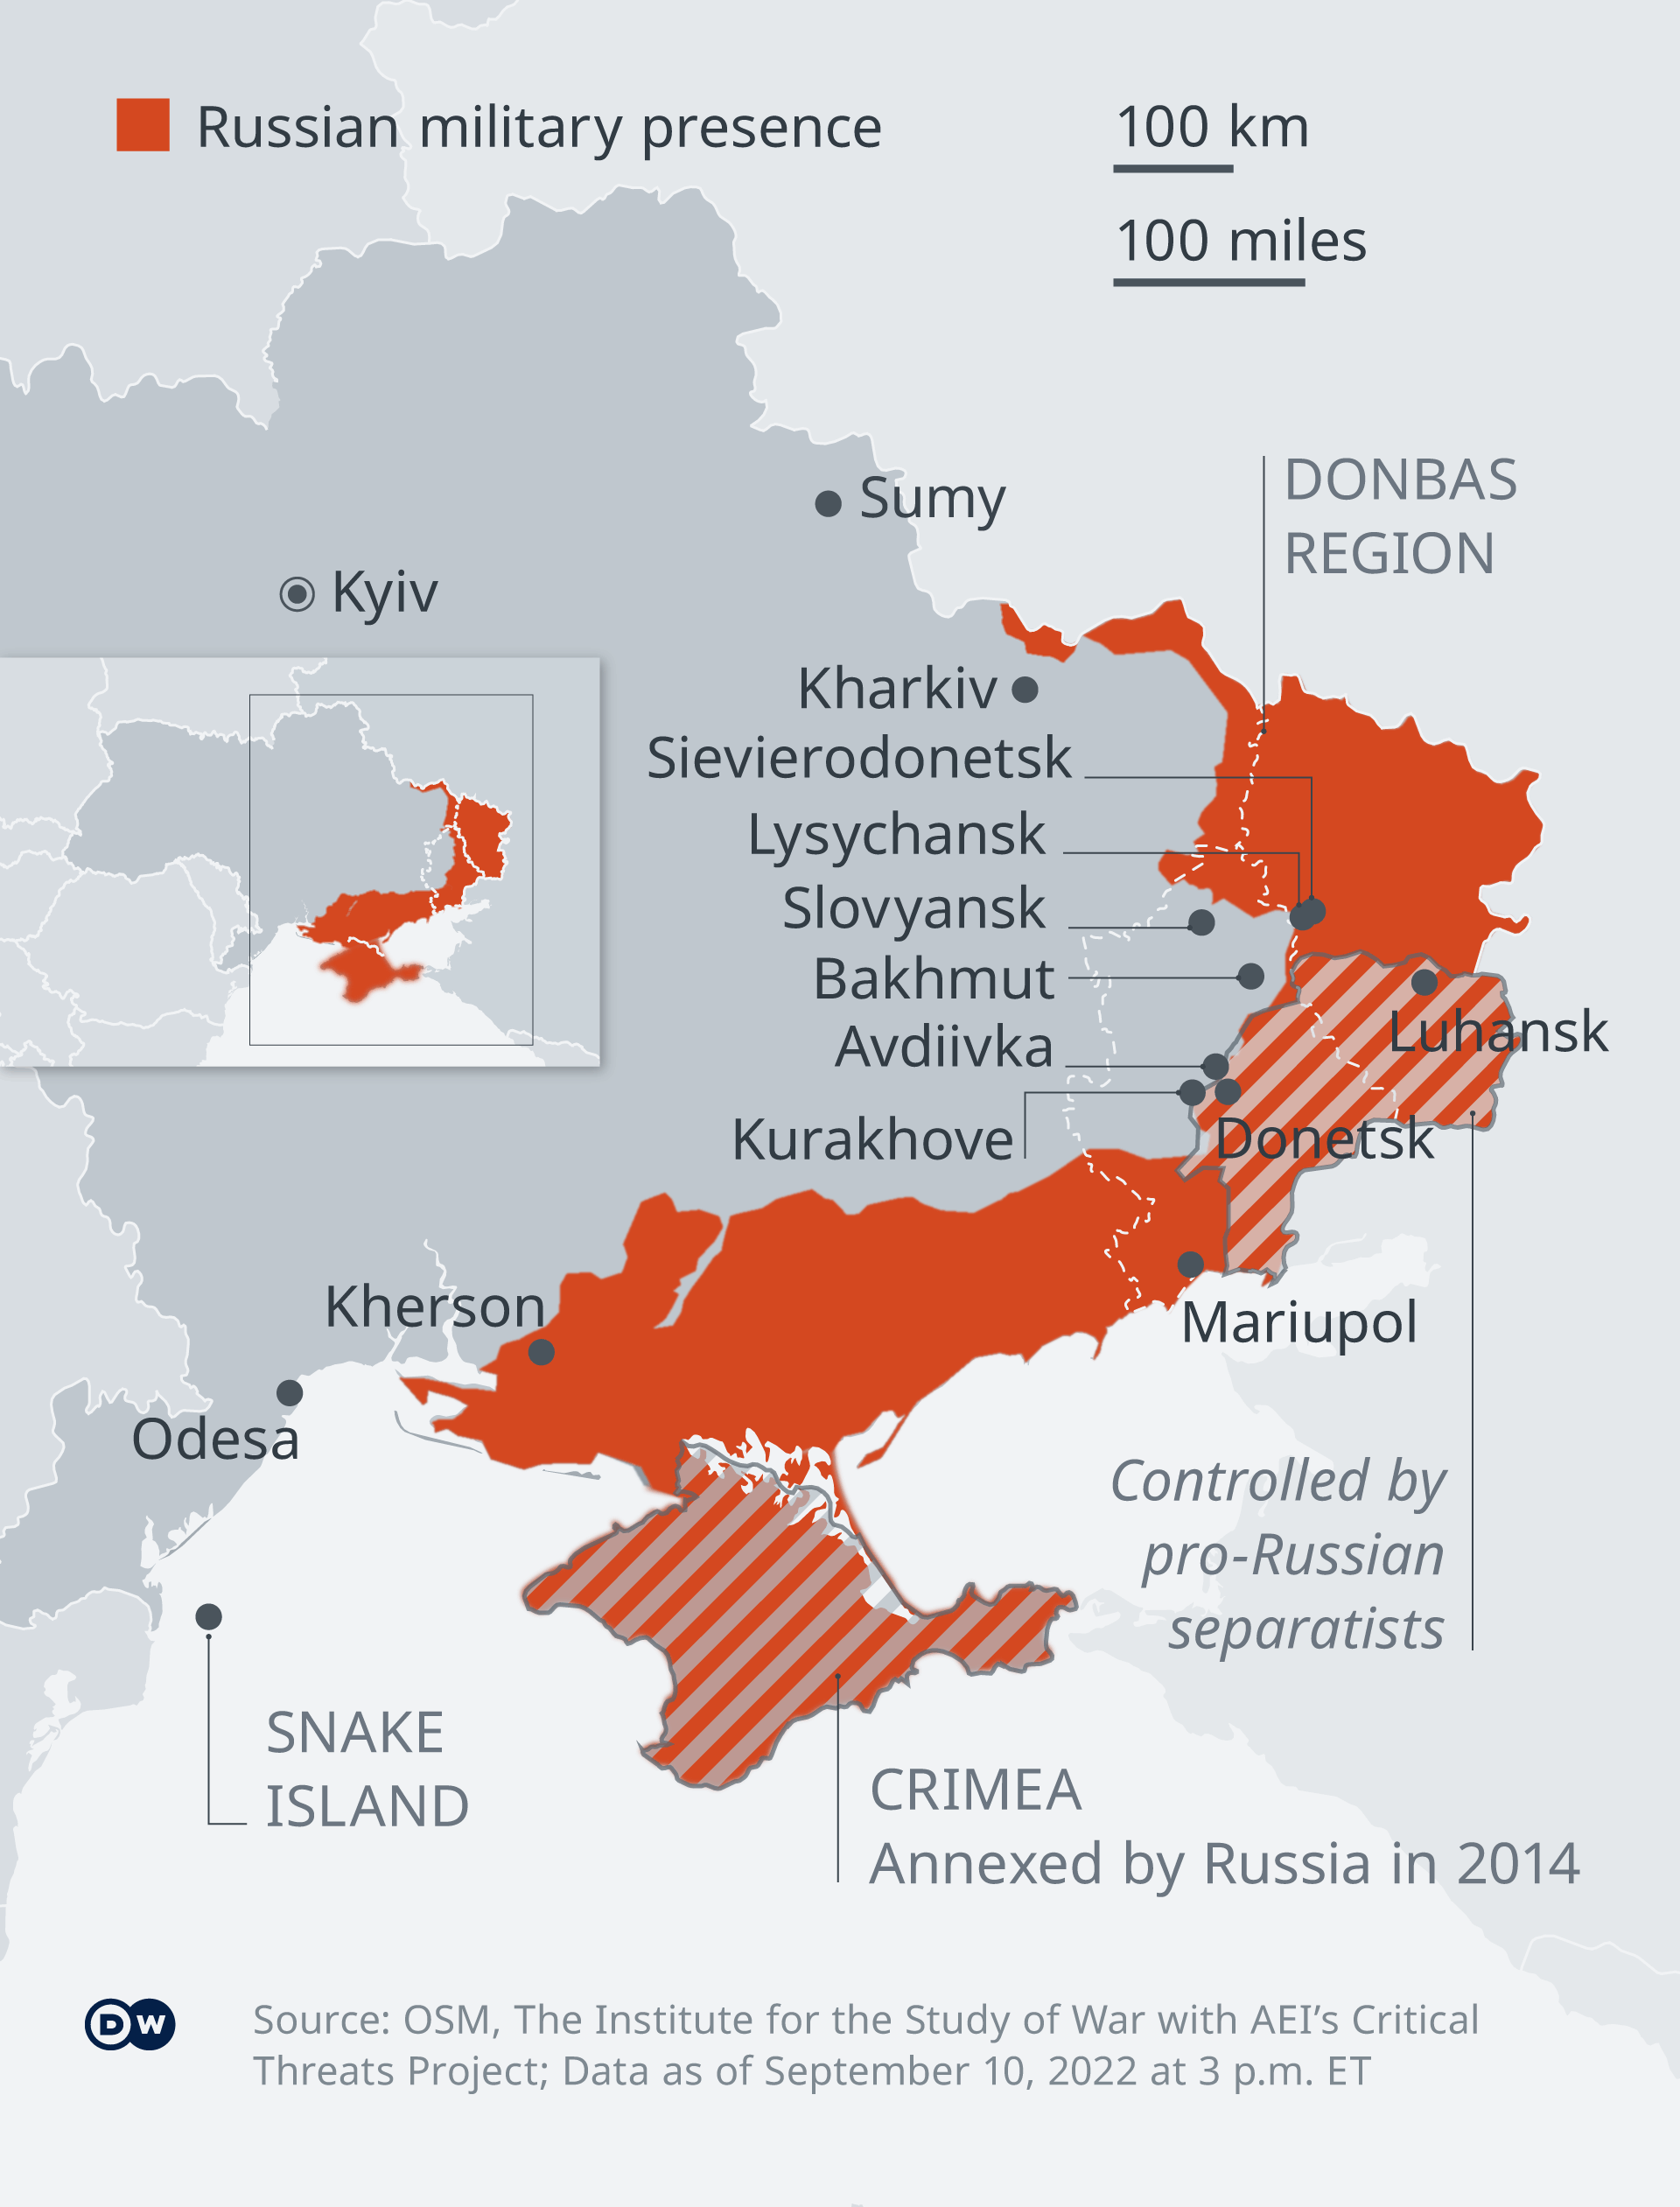 Map showing Russian military presence in Ukraine